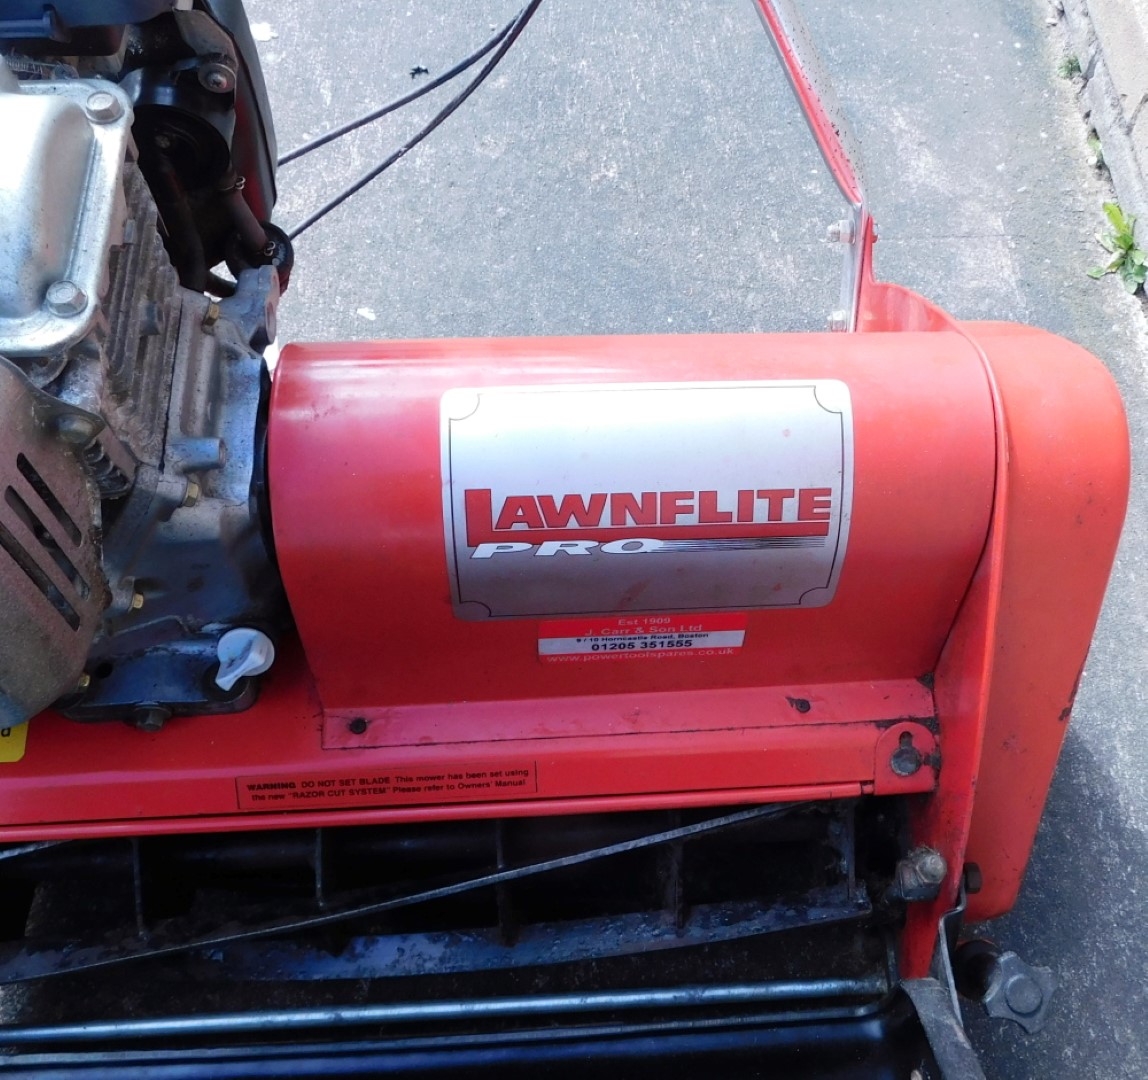 A Lawnflite Pro cylinder mower, with Honda GC160 5.0 engine. - Image 3 of 4